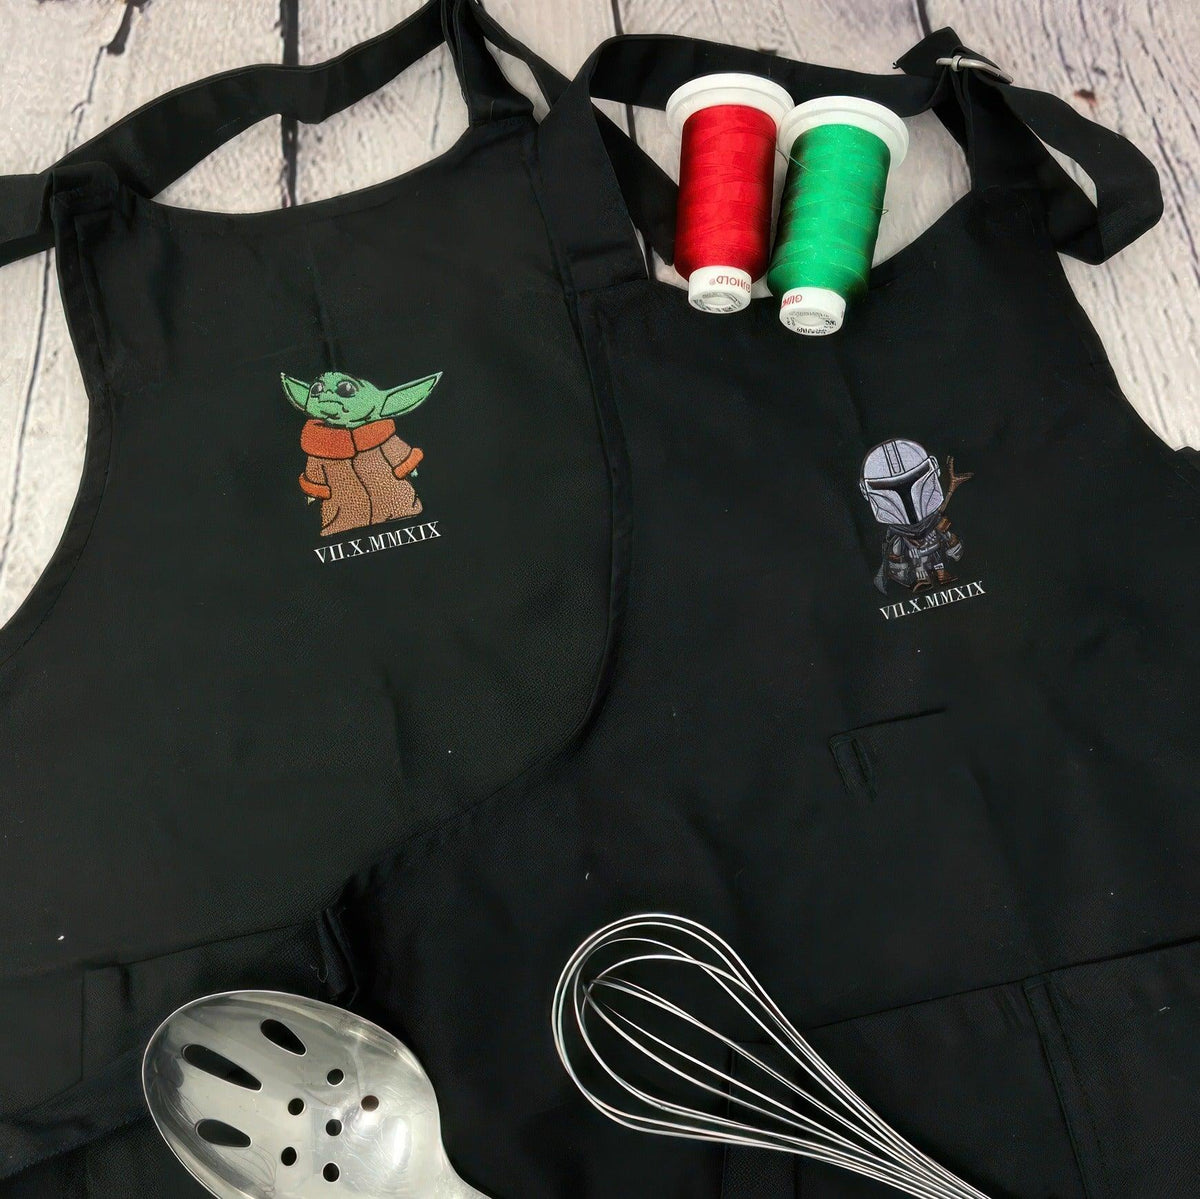 Custom Embroidered Aprons For Couples, Matching Couples Aprons, Cute Cartoon Character Couples Embroidery Aprons